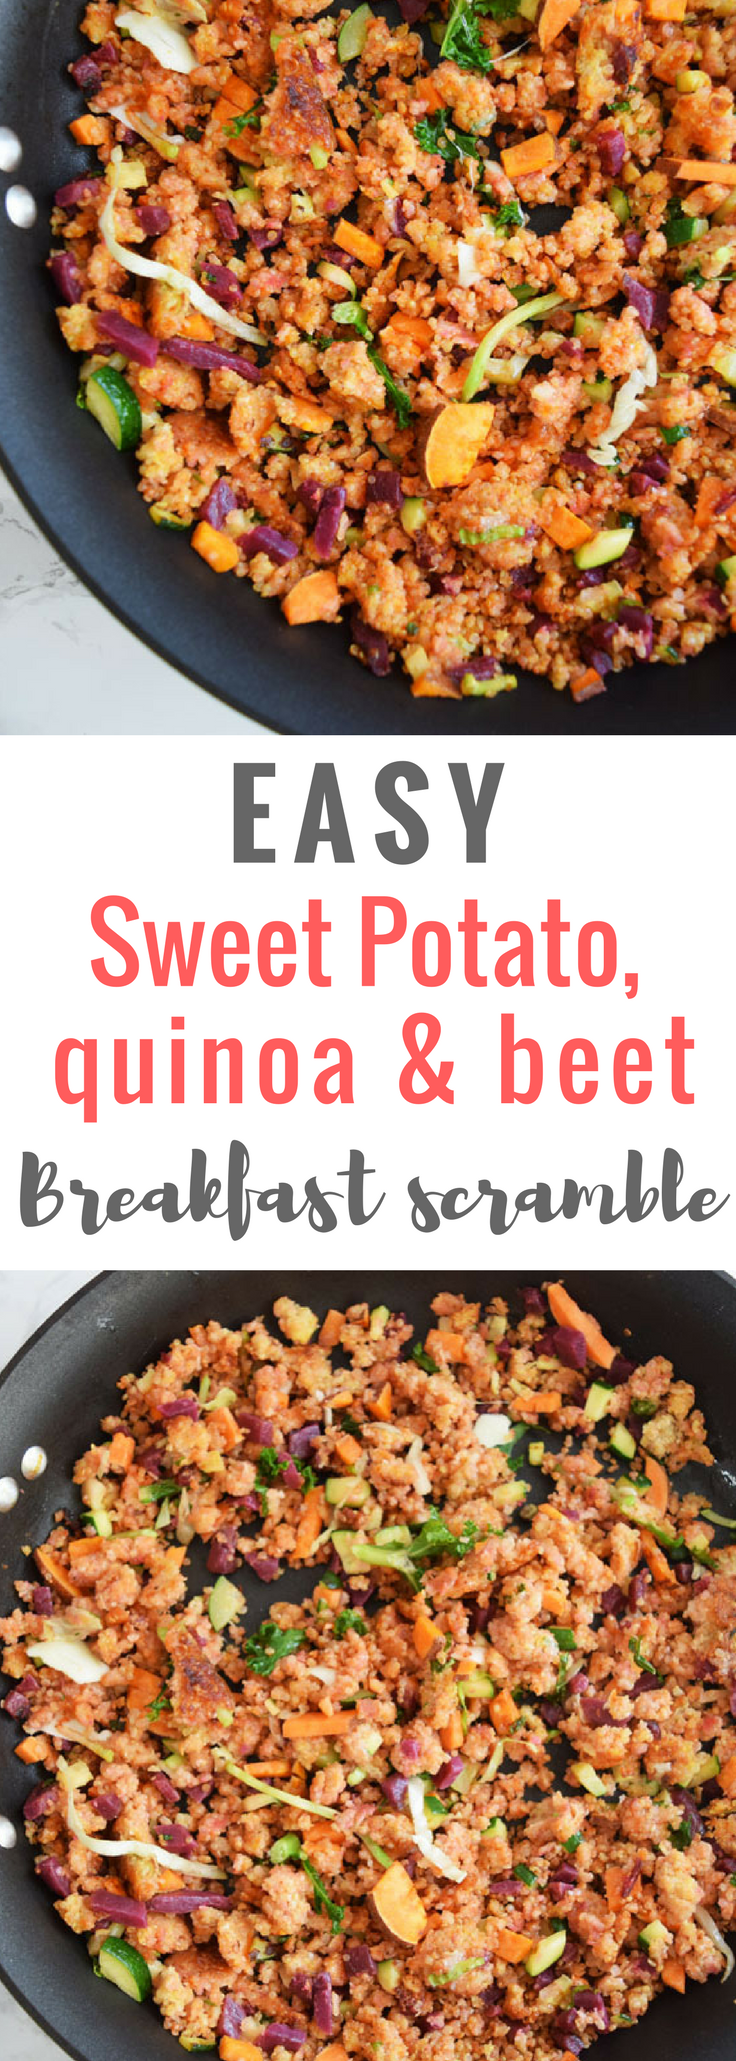 pinterest graphic for beet and quinoa scramble